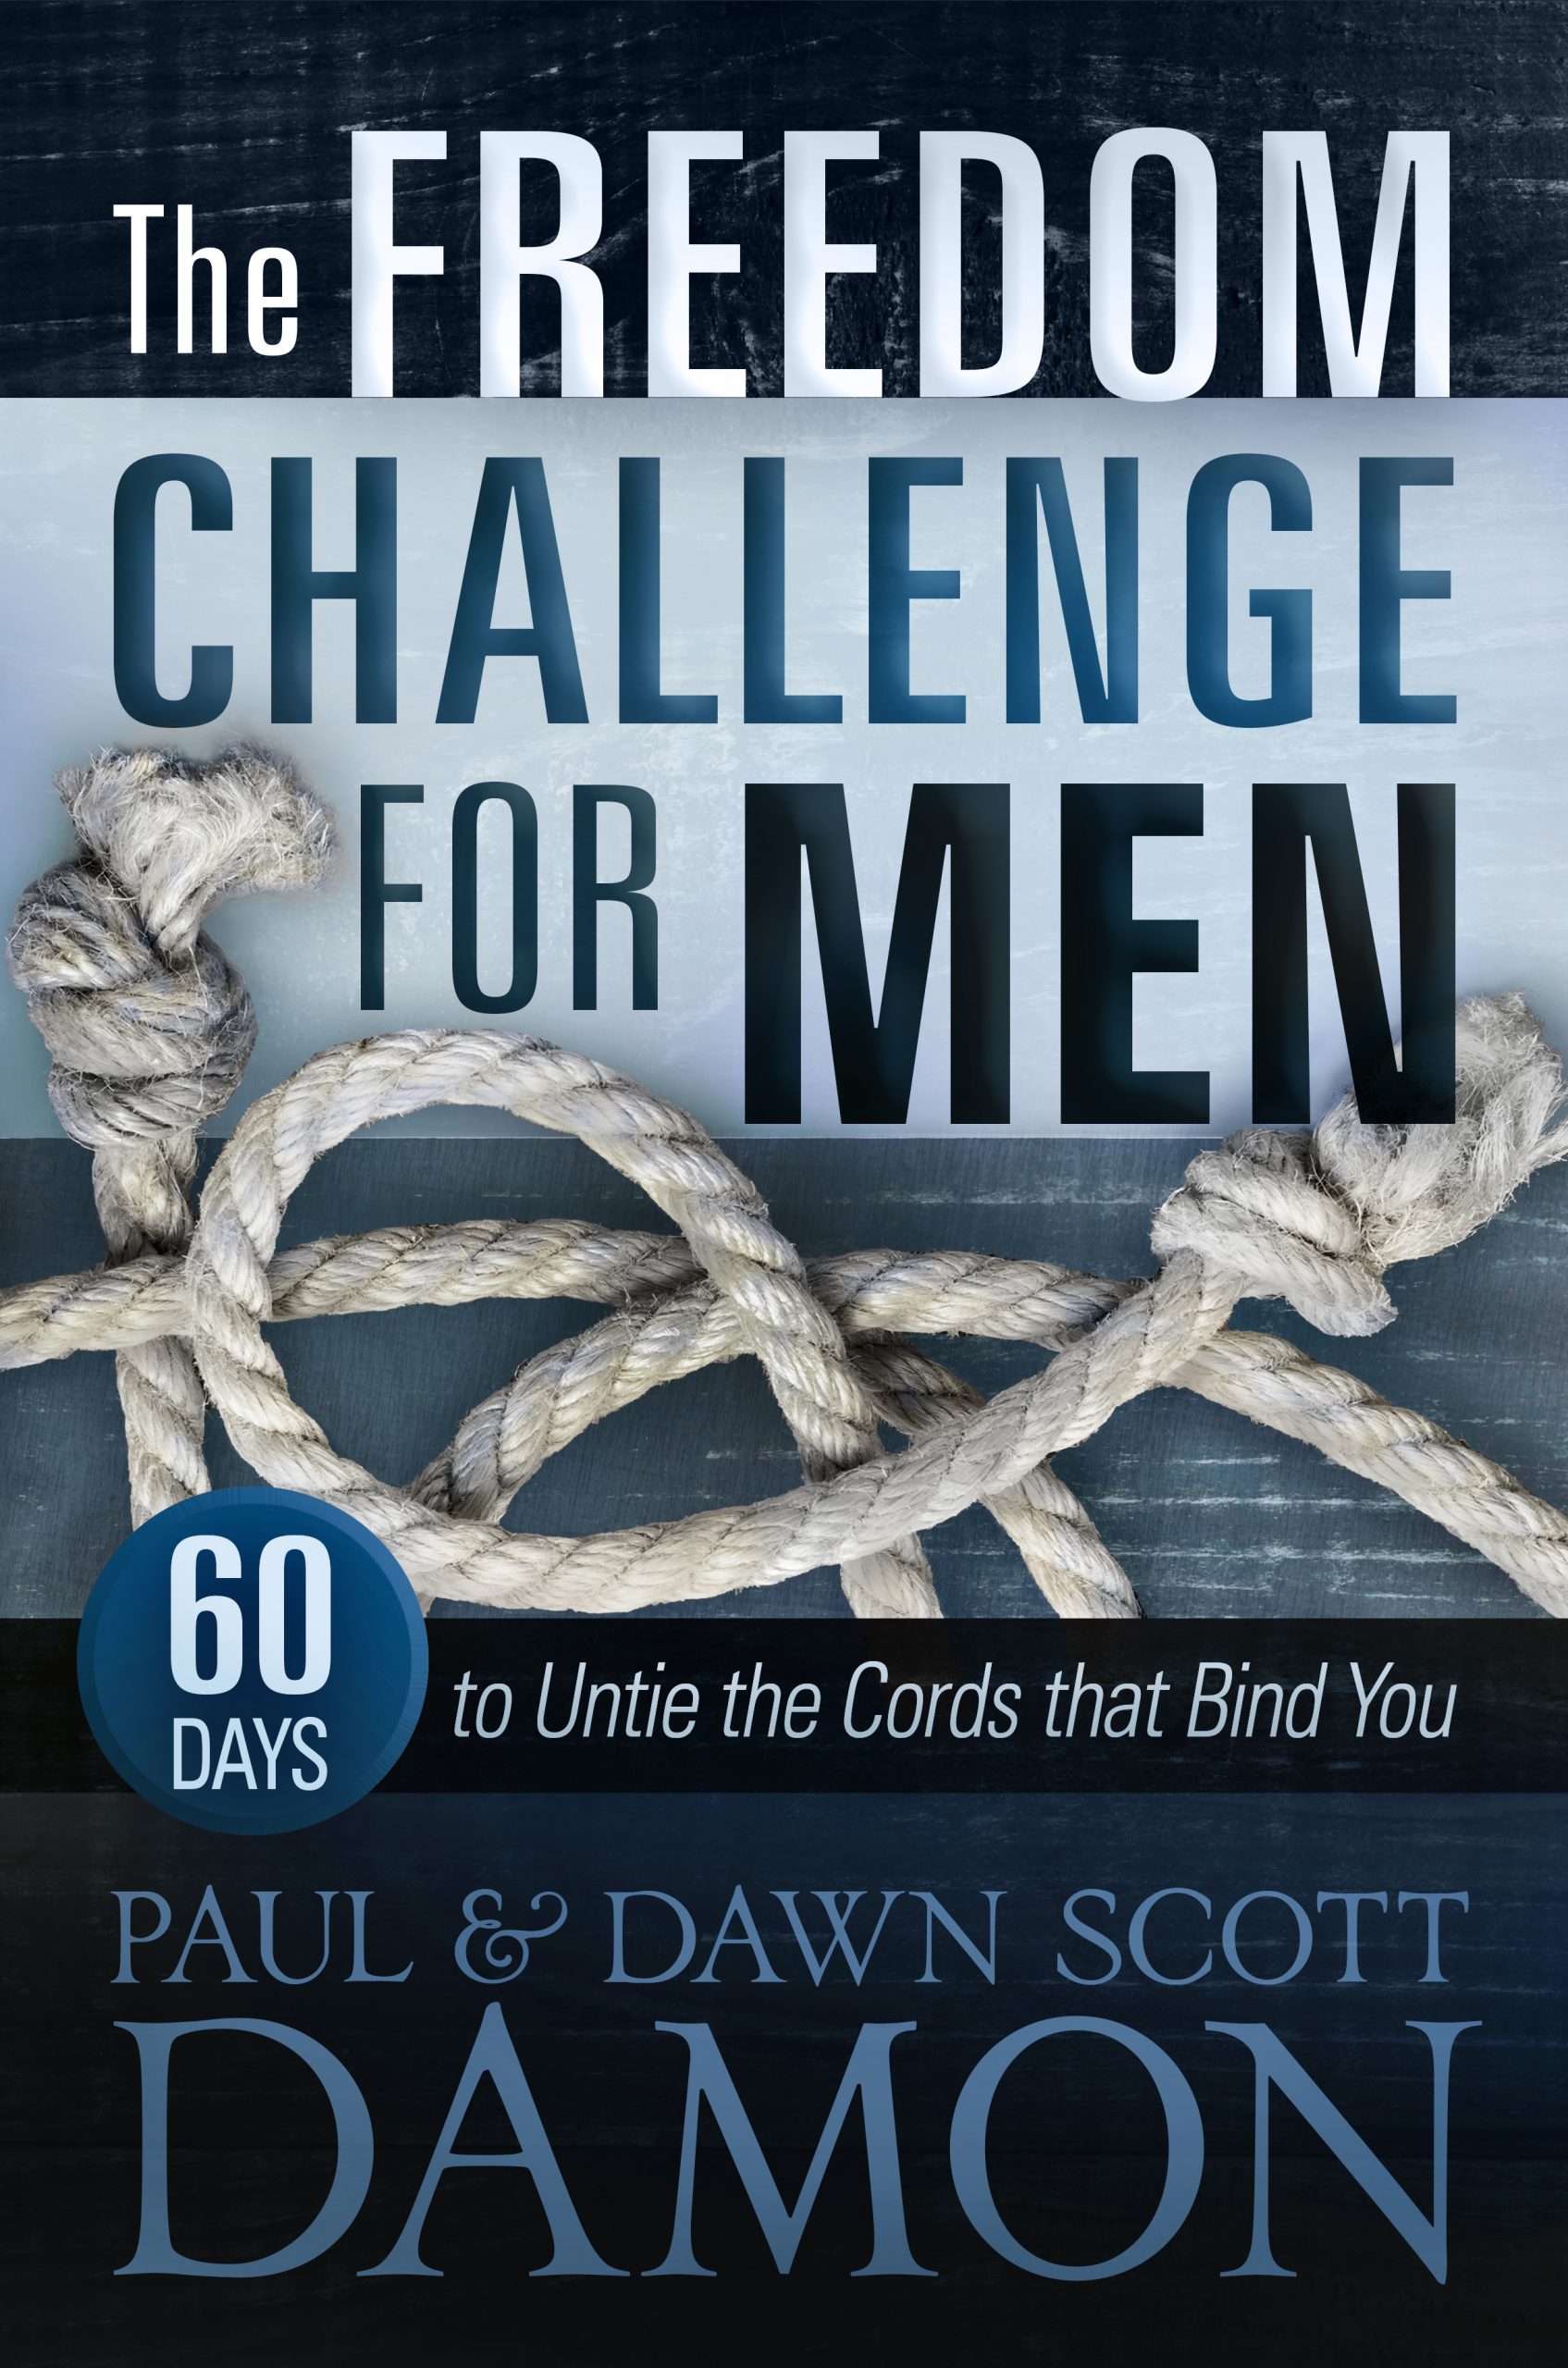 The Freedom Challenge for Men